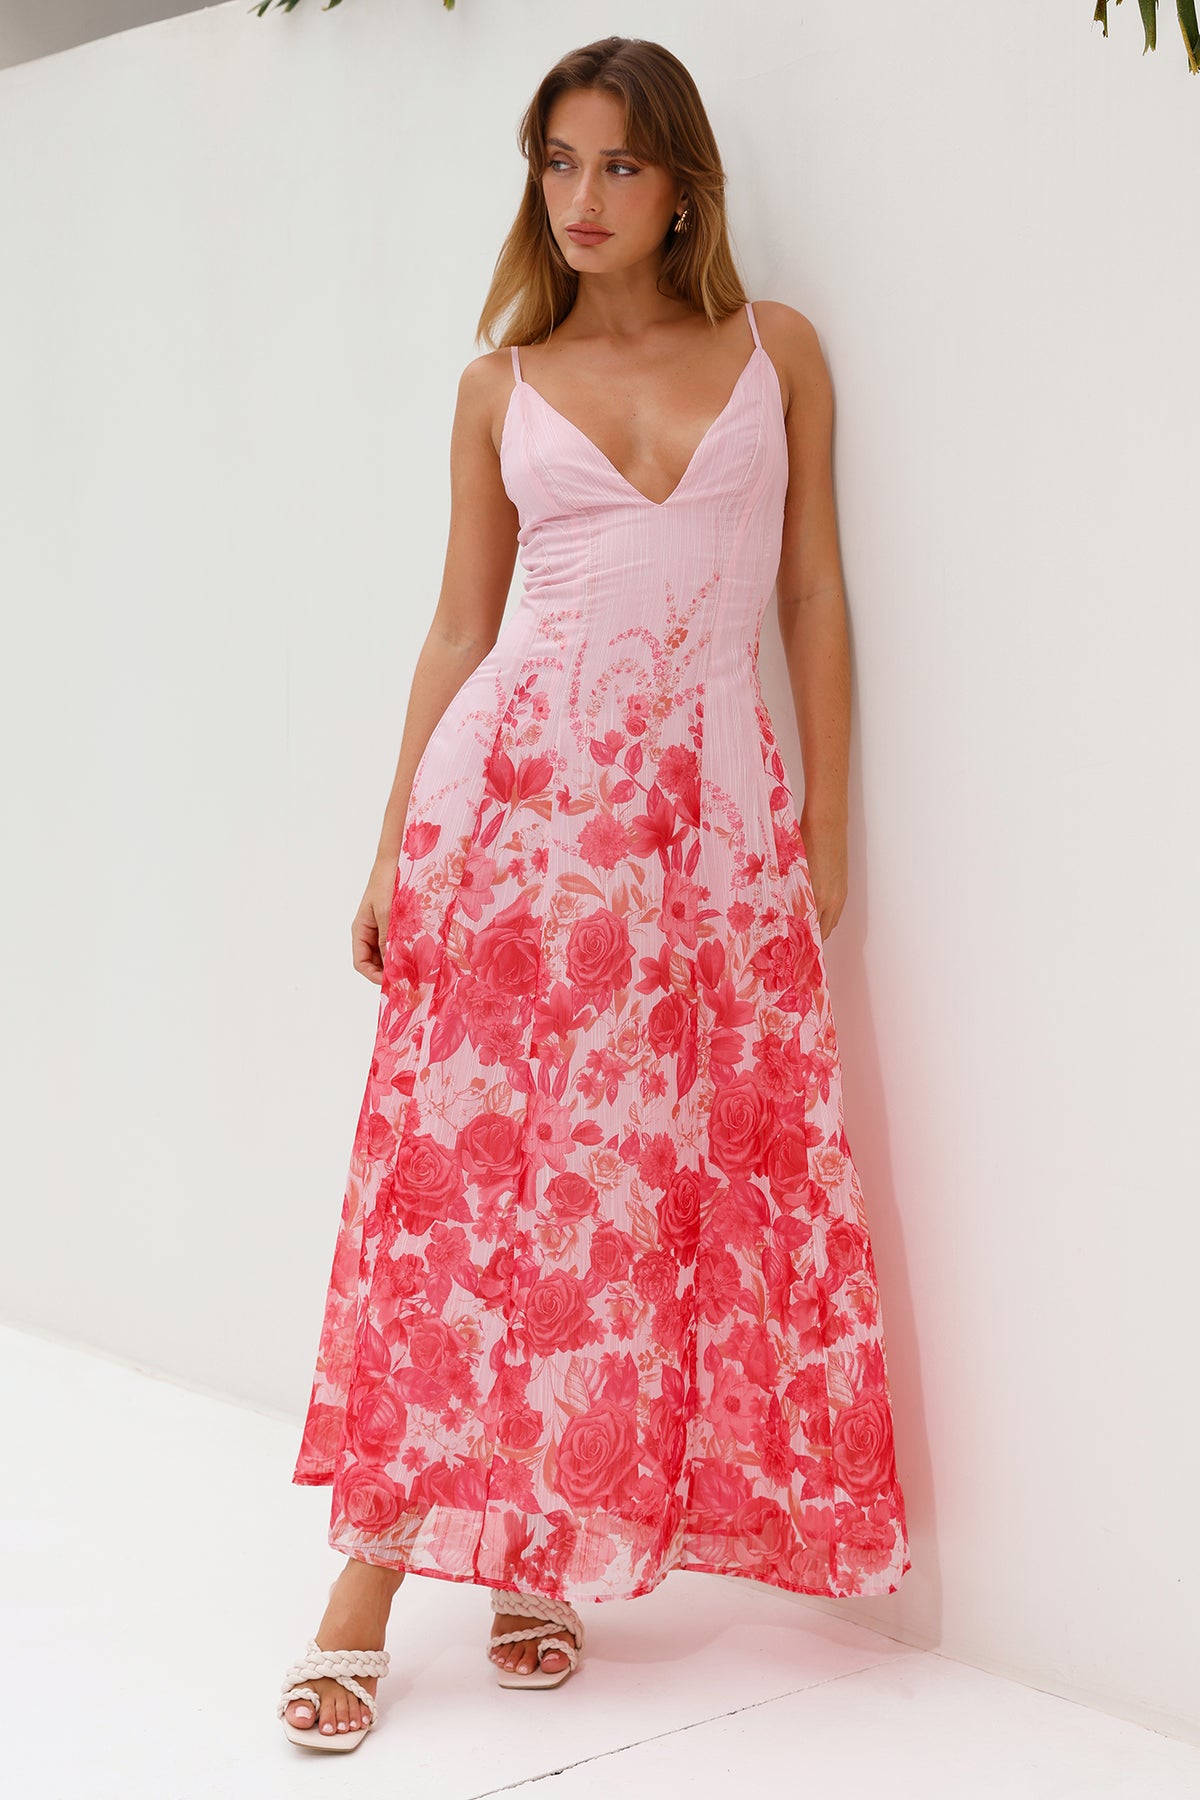 Shop Formal Dress - Raise The Roof Maxi Dress Pink featured image